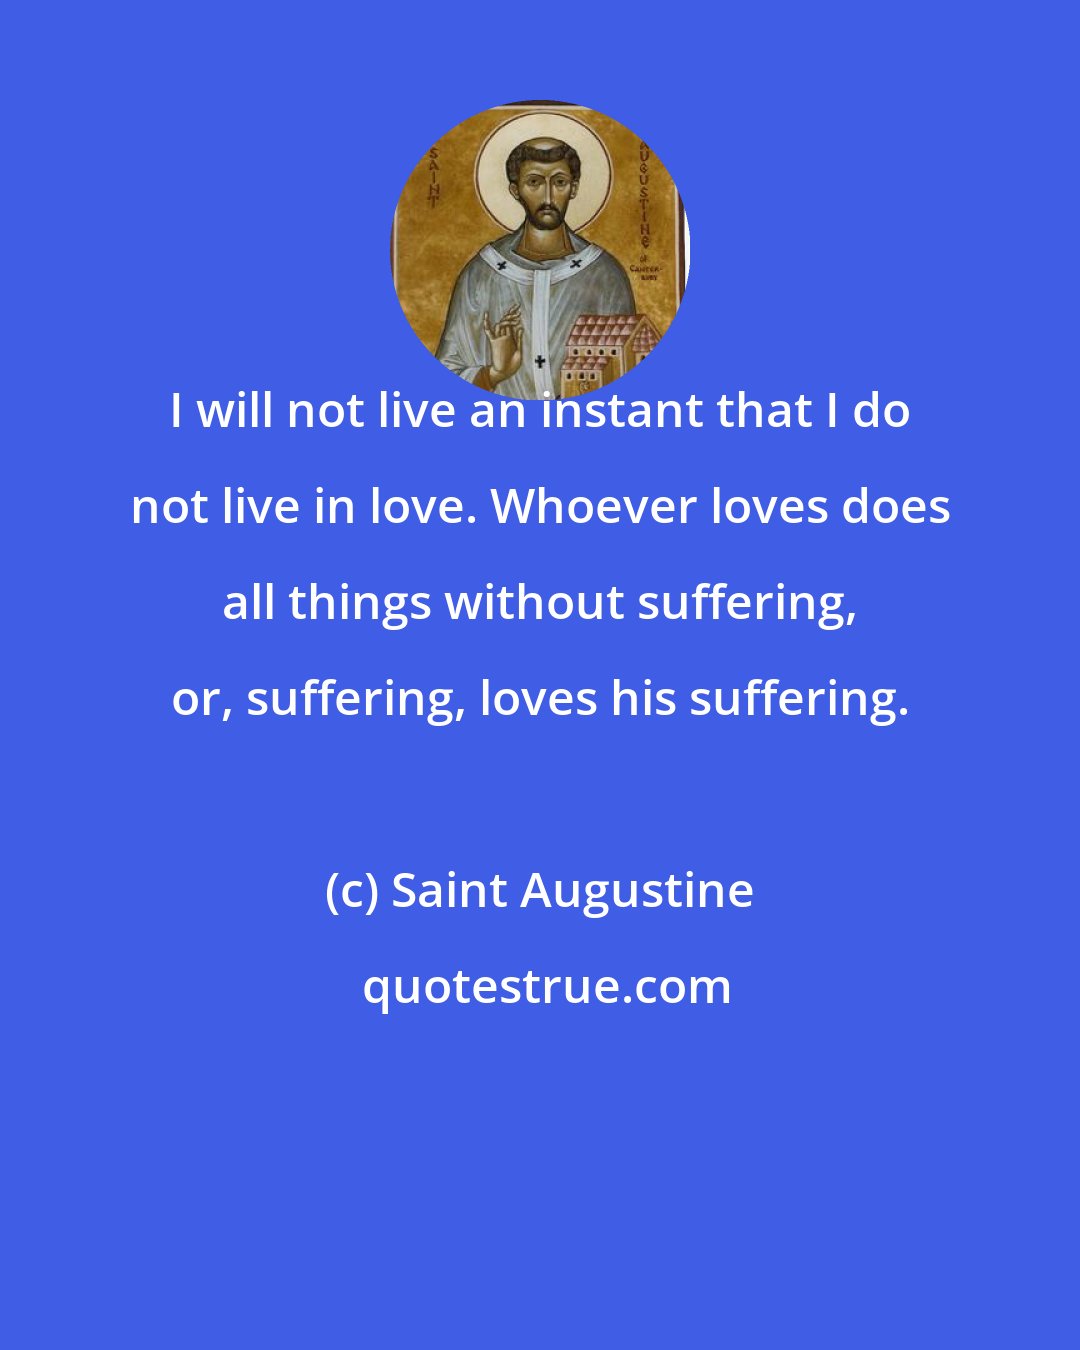 Saint Augustine: I will not live an instant that I do not live in love. Whoever loves does all things without suffering, or, suffering, loves his suffering.